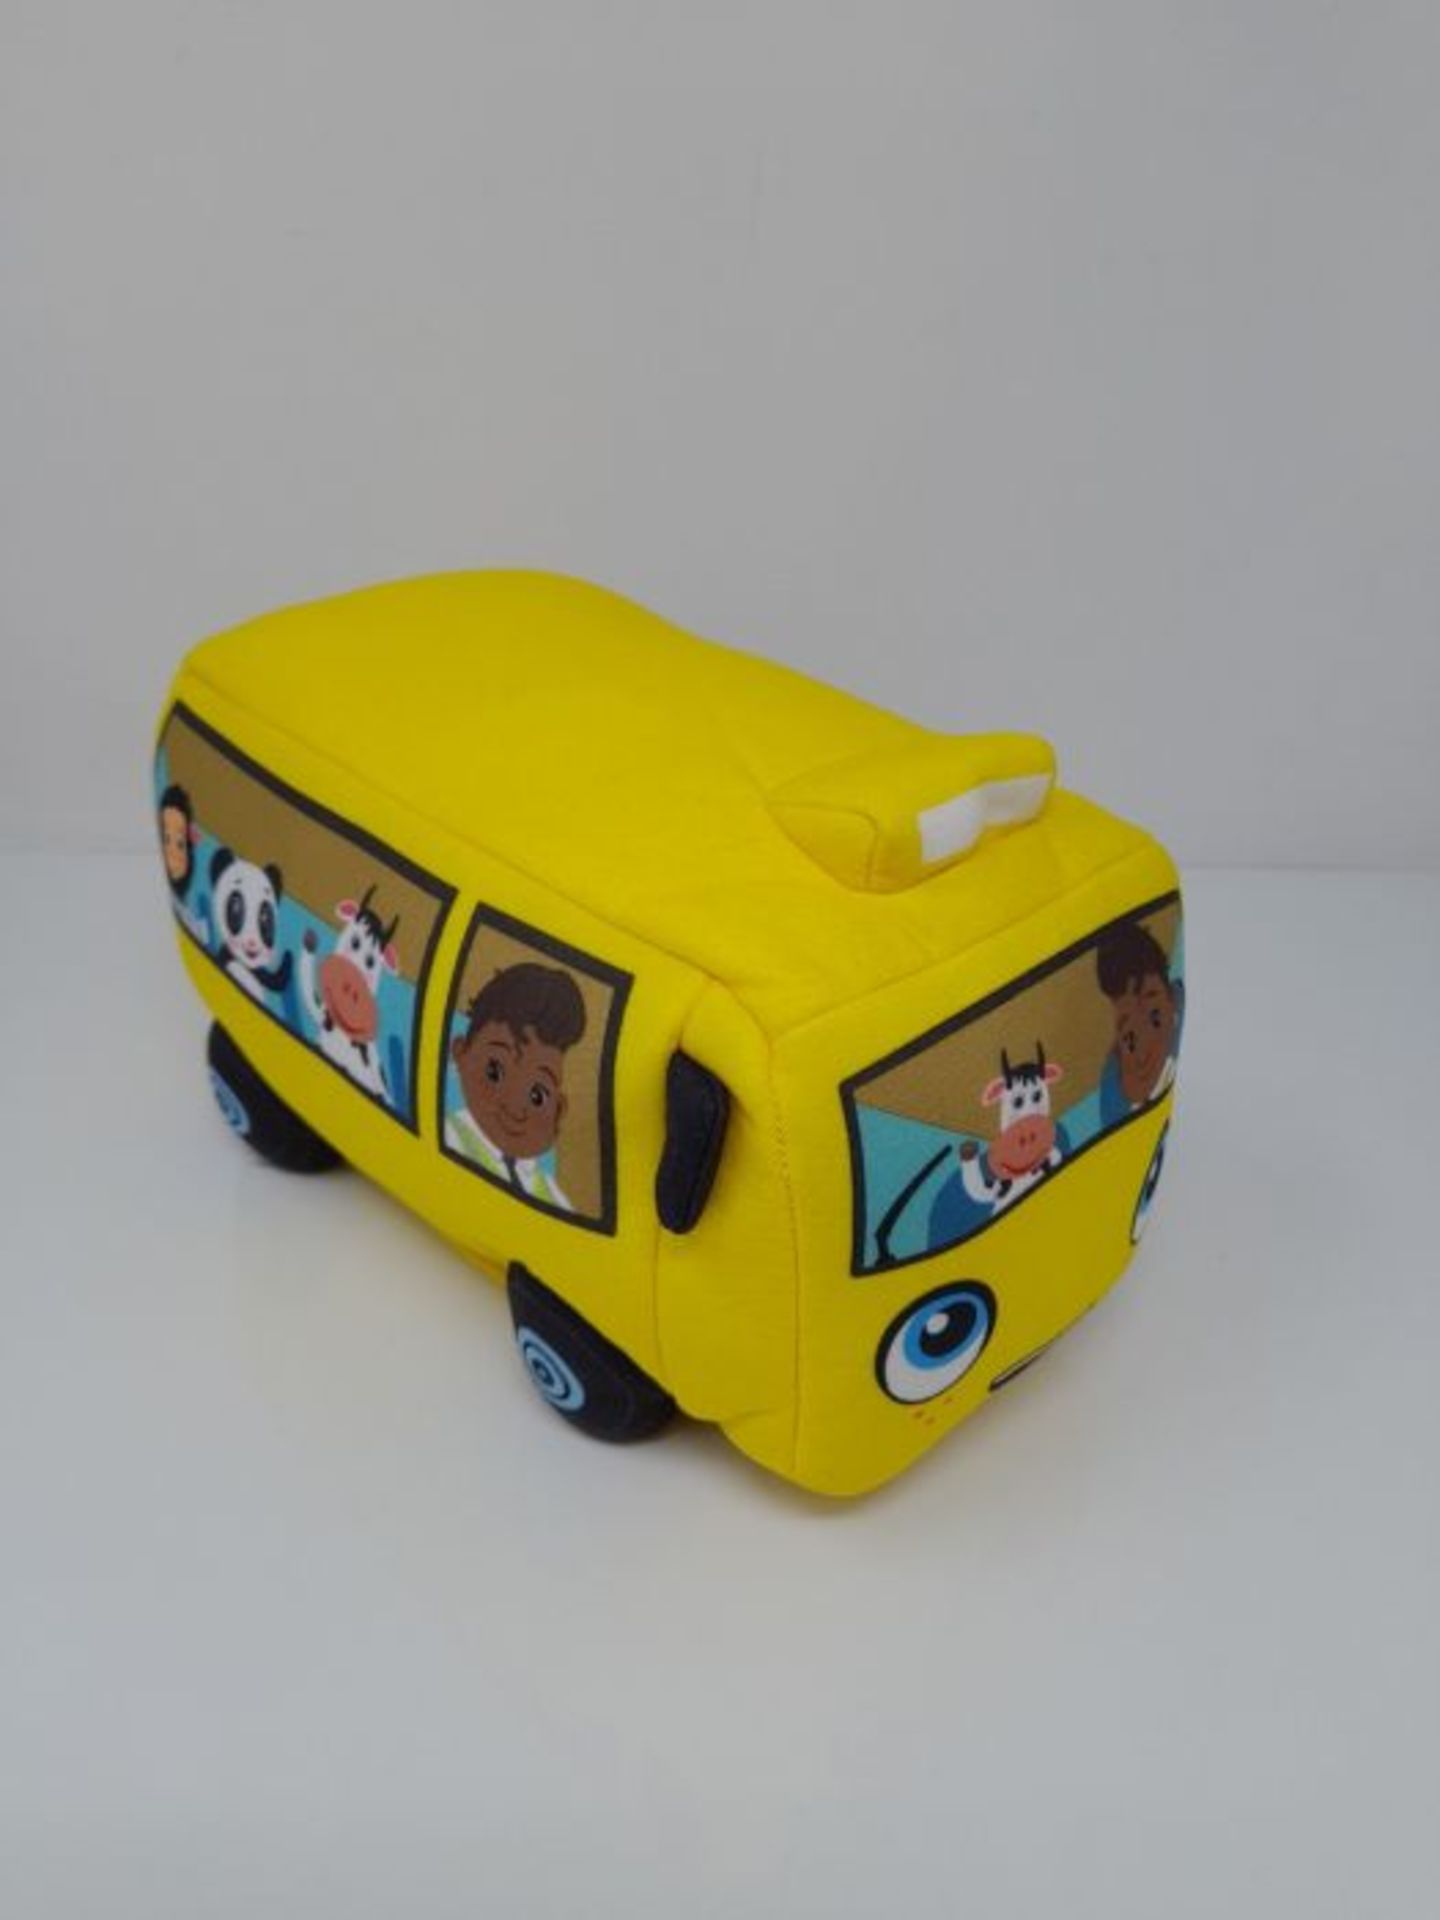 Little Baby Bum Little Tikes Wiggling Wheels on the Bus - Play & Learn - Interactive - - Image 2 of 3